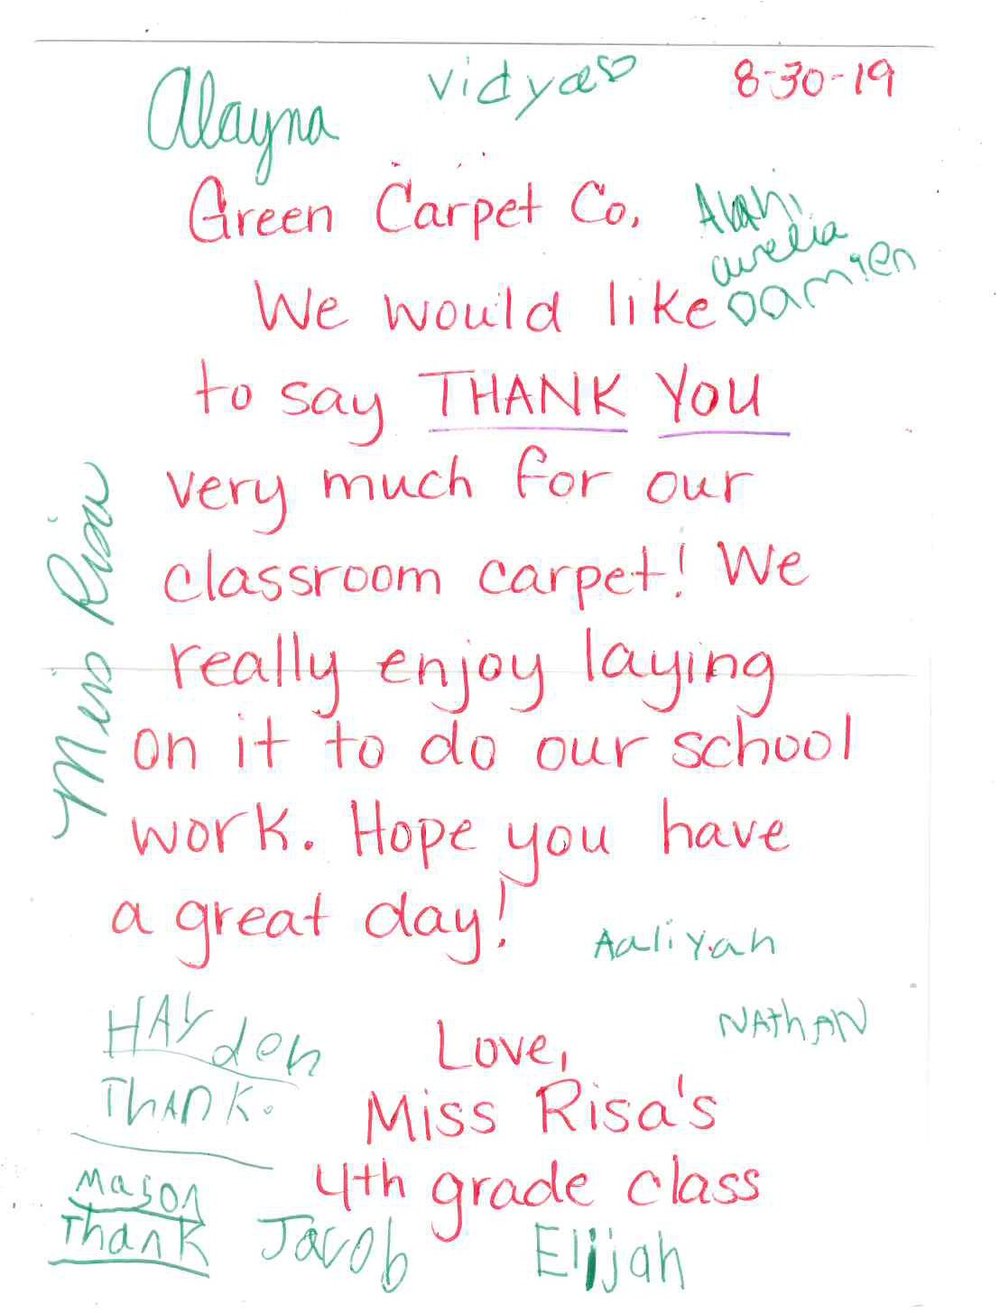 Green Carpet Co. - The Flooring Connection - Reviews